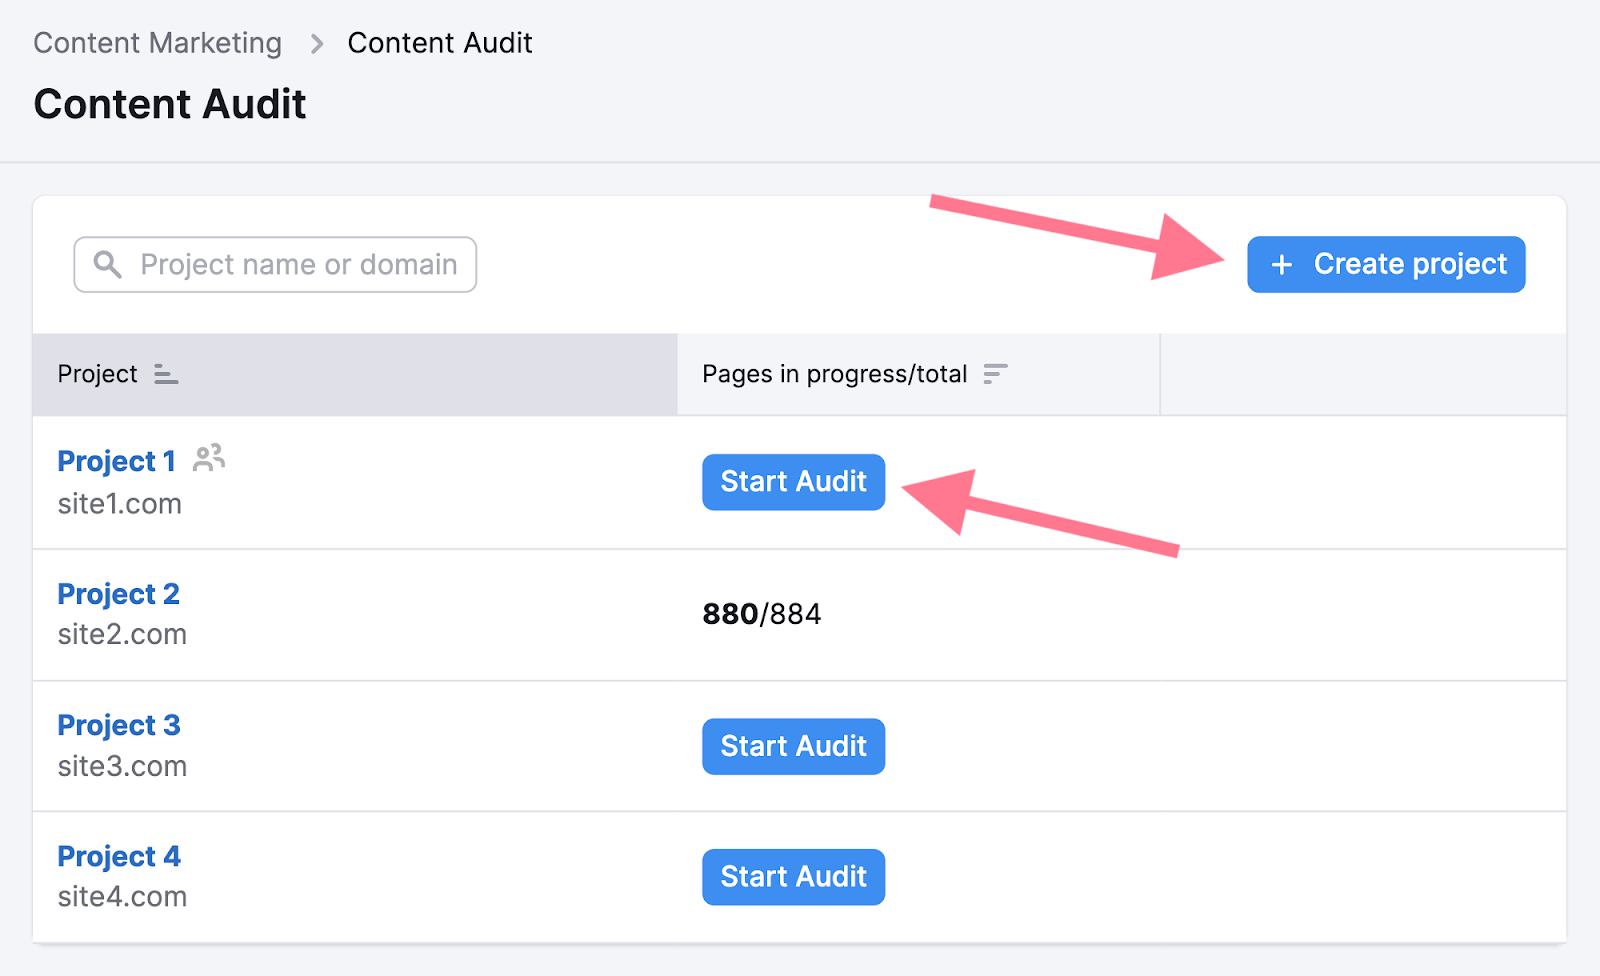 Create project in content audit